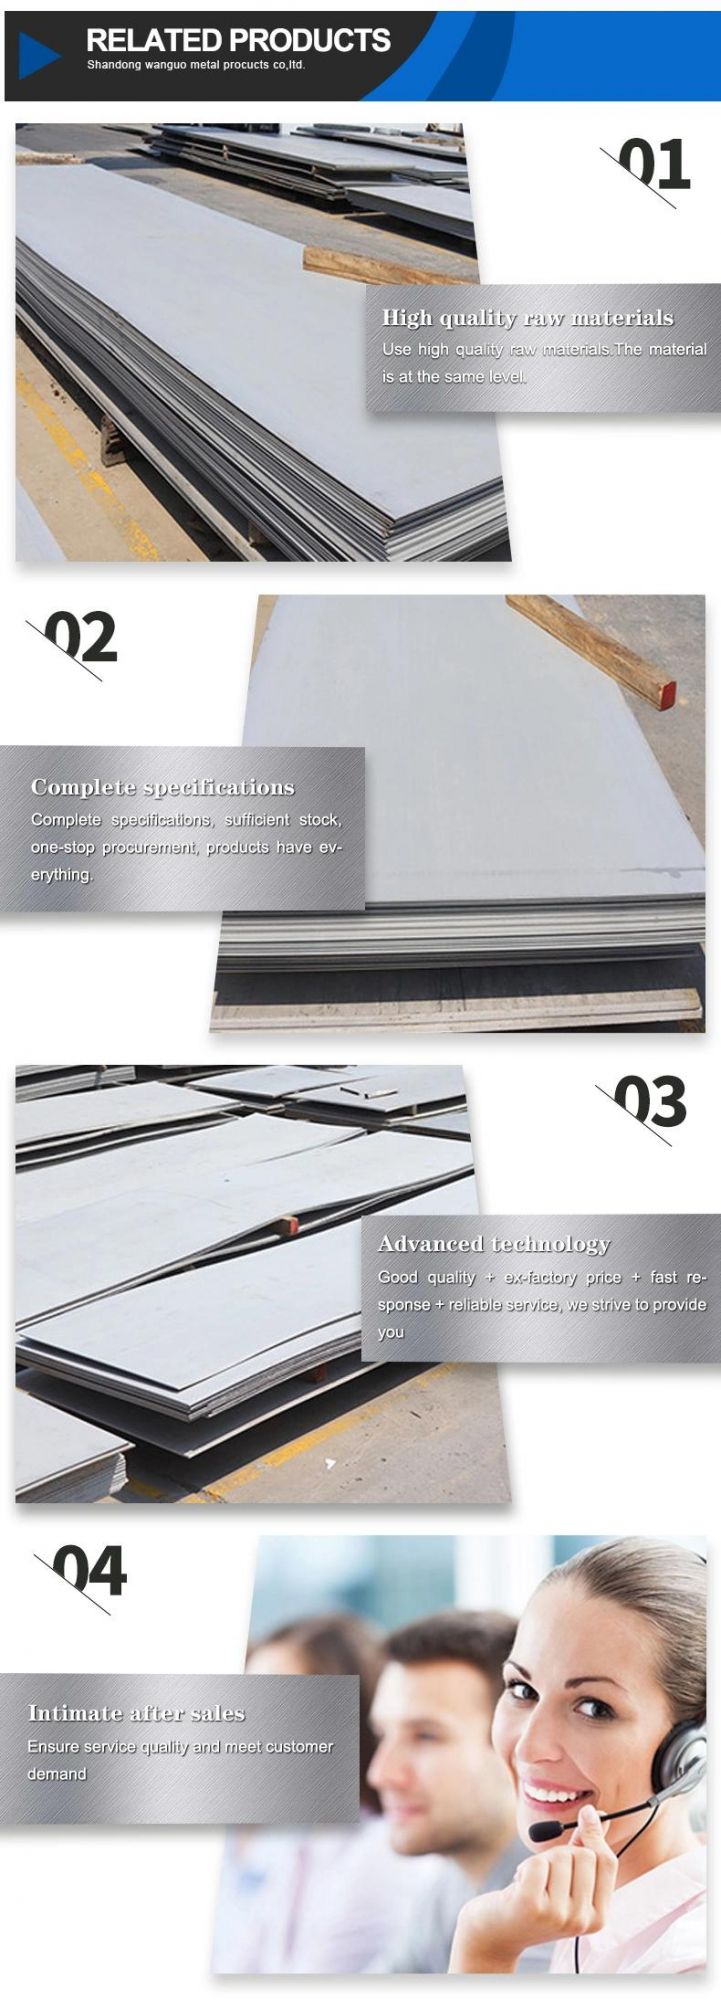 Cgi Sheet Roofing Sheet Corrugated Roof Sheets Galvanized Steel Roofing Sheet Zinc Coating Sheet 201 304 304L 316 316L Galvanized Steel Plate